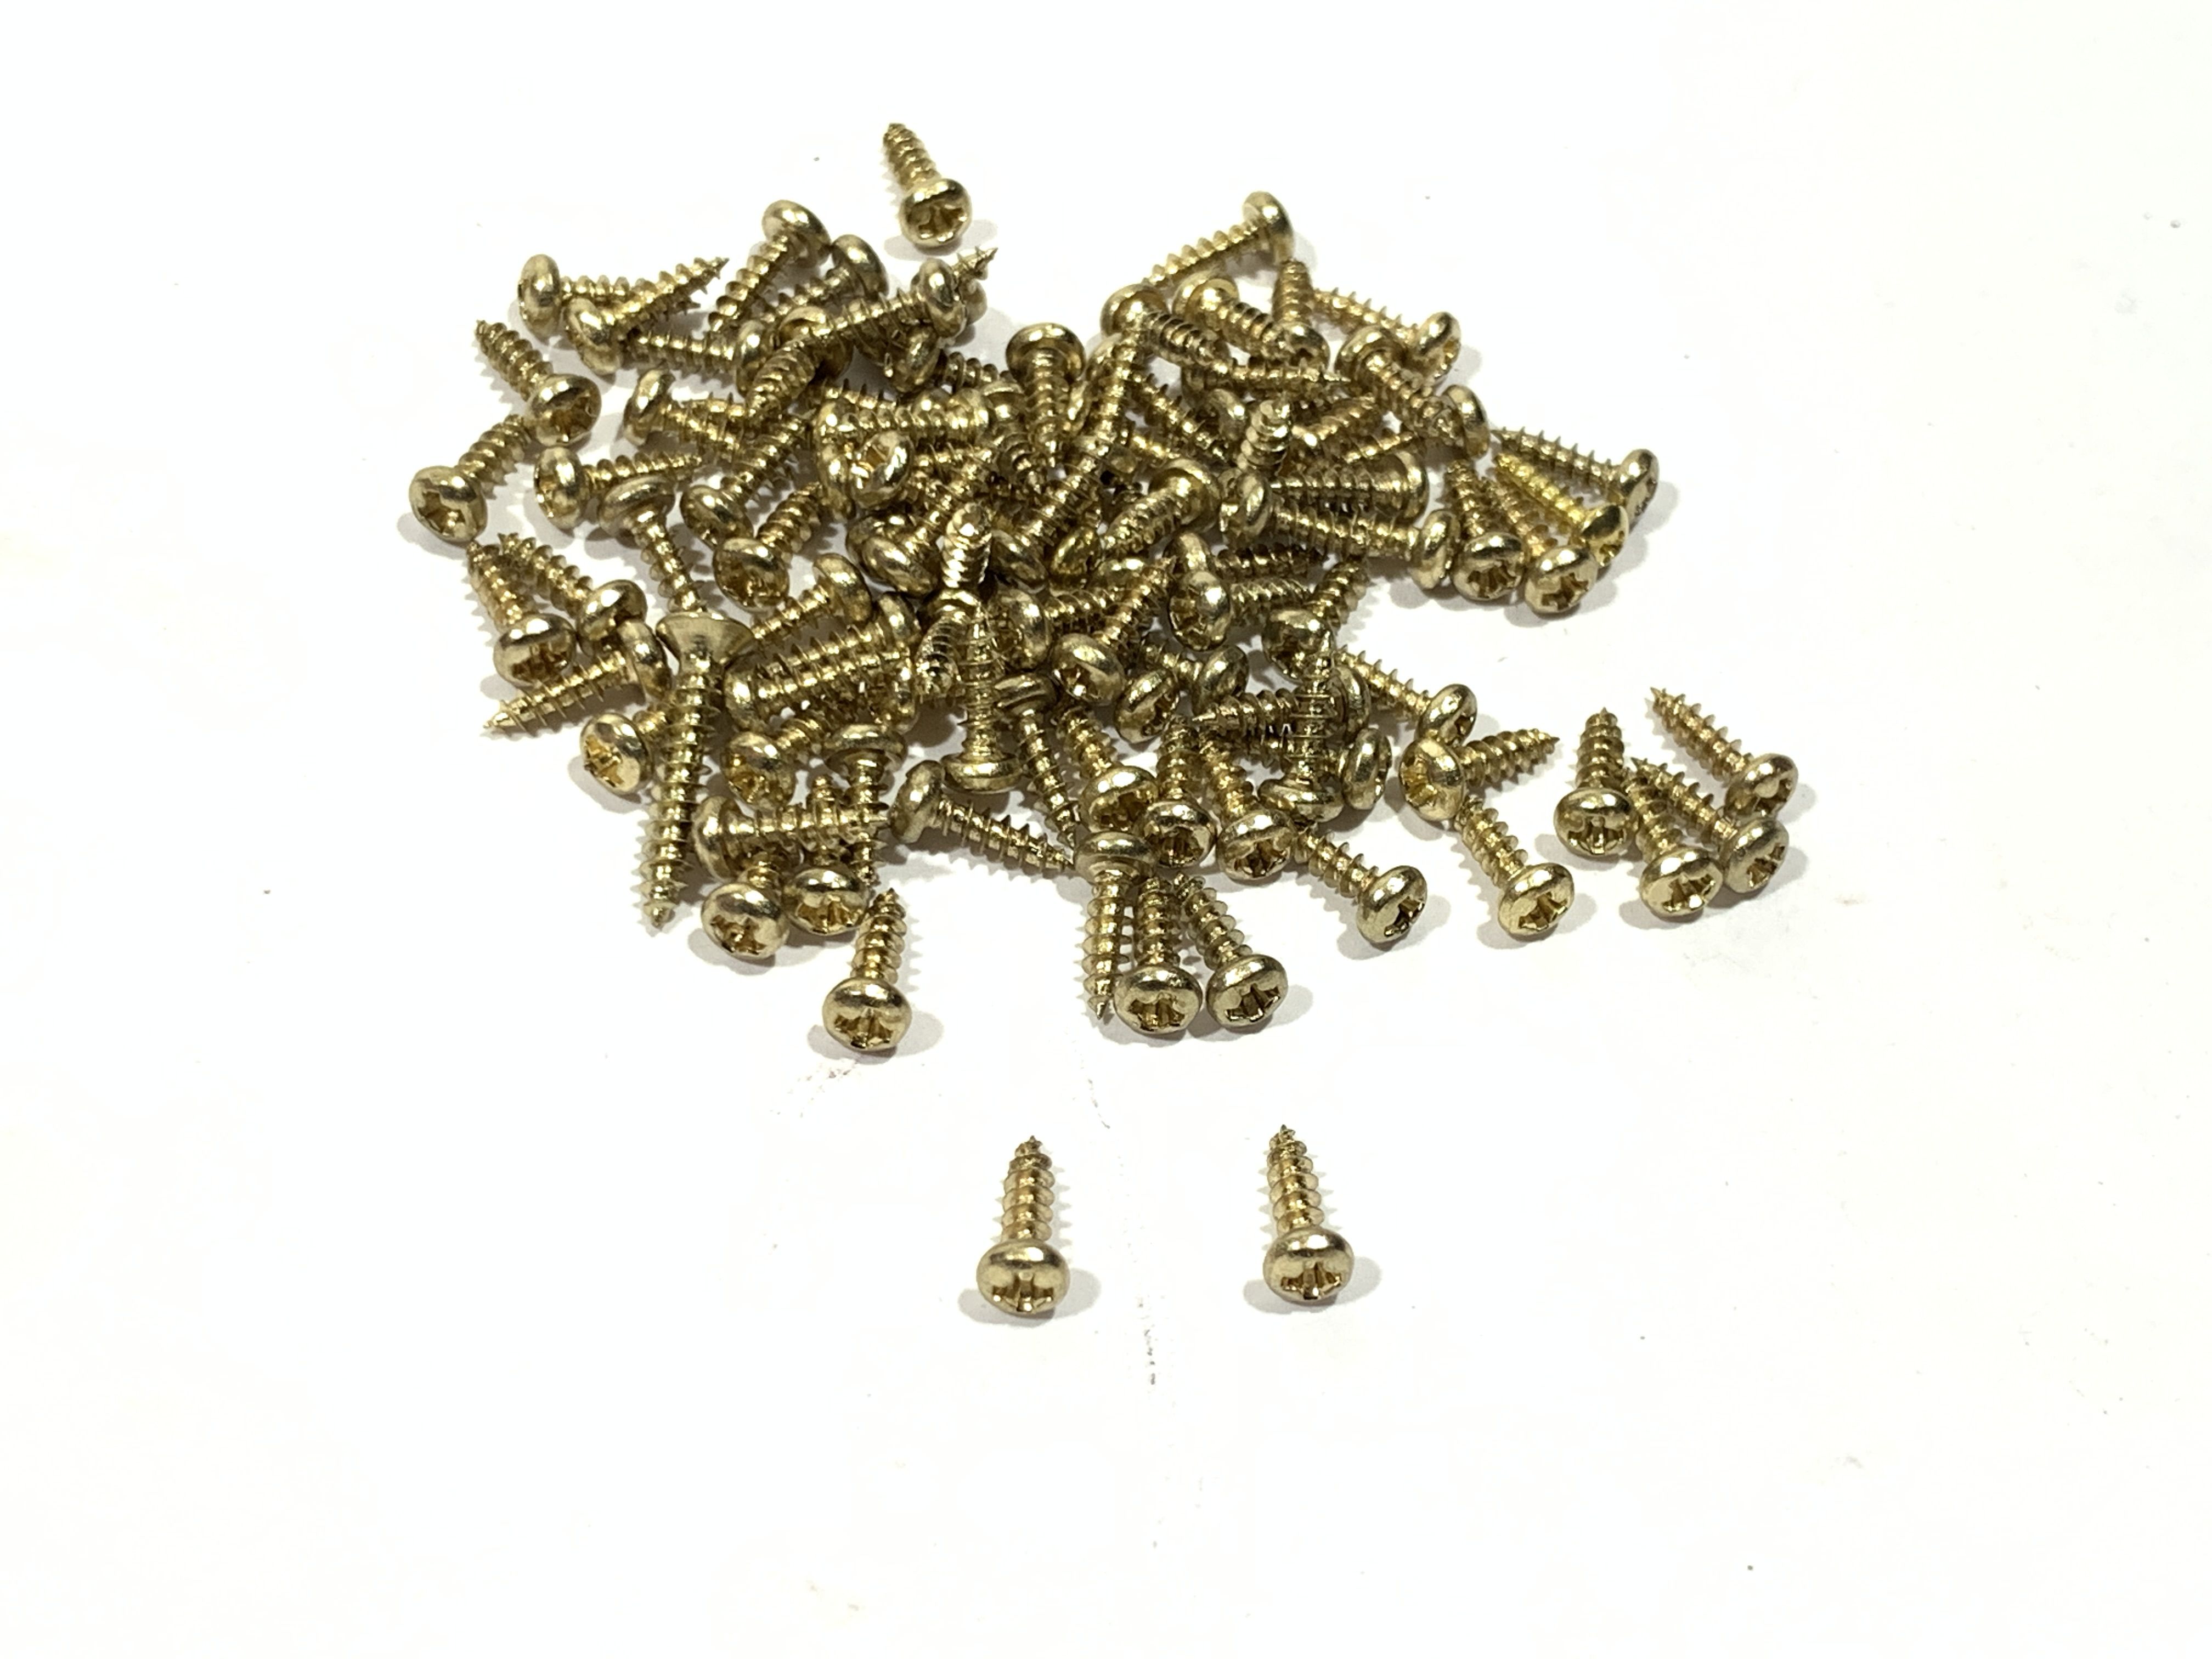 20-Pack The Hillman Group The Hillman Group 1189 Brass Chrome Plated Oval Head Slotted Wood Screw 10 x 1 1/4 In